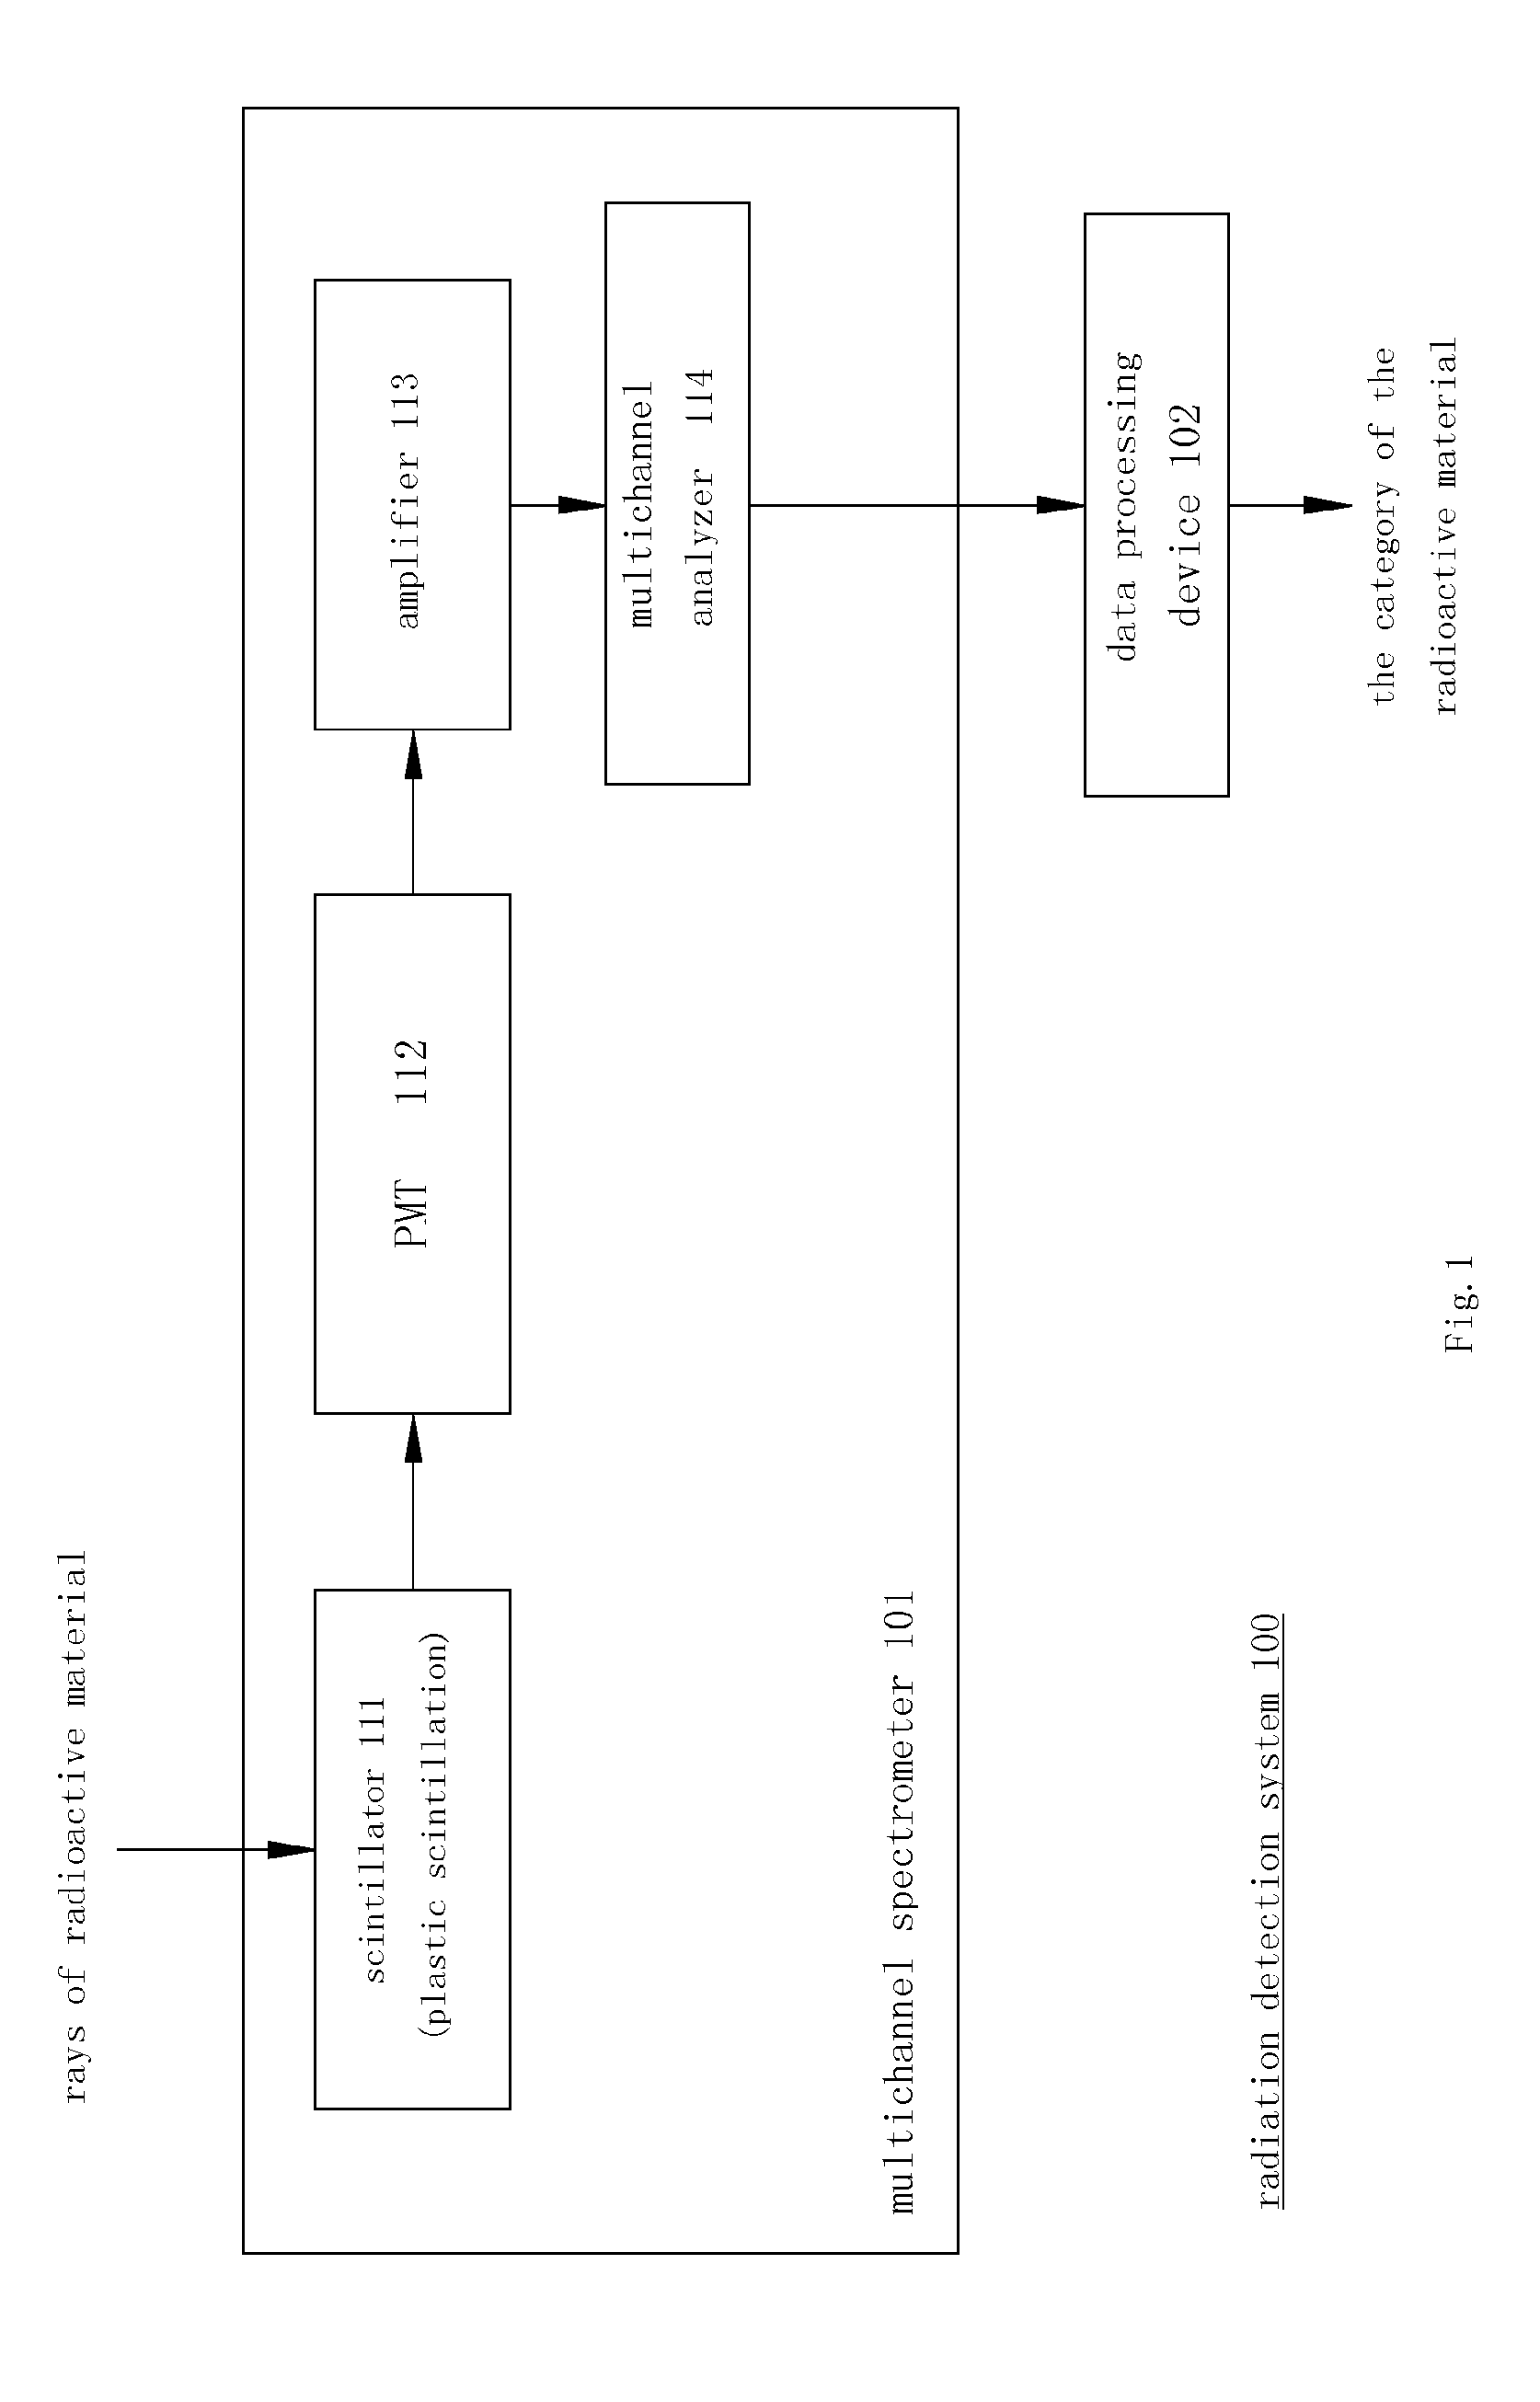 Radiation detection system using a multichannel spectrometer and method thereof